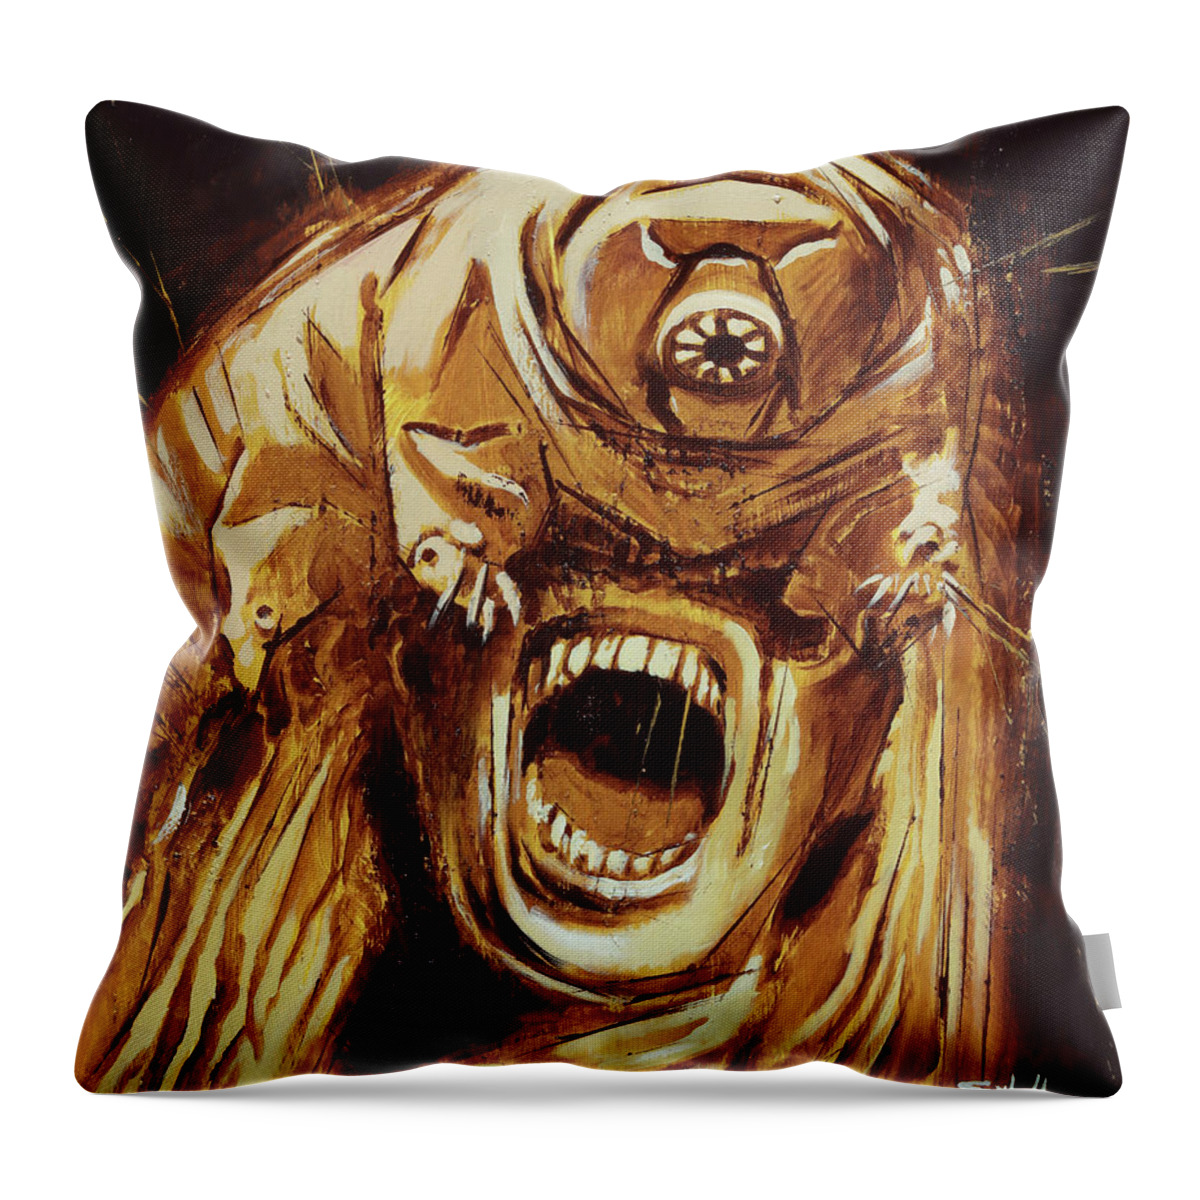 Sciencefiction Throw Pillow featuring the painting Tardigrade Future by Sv Bell